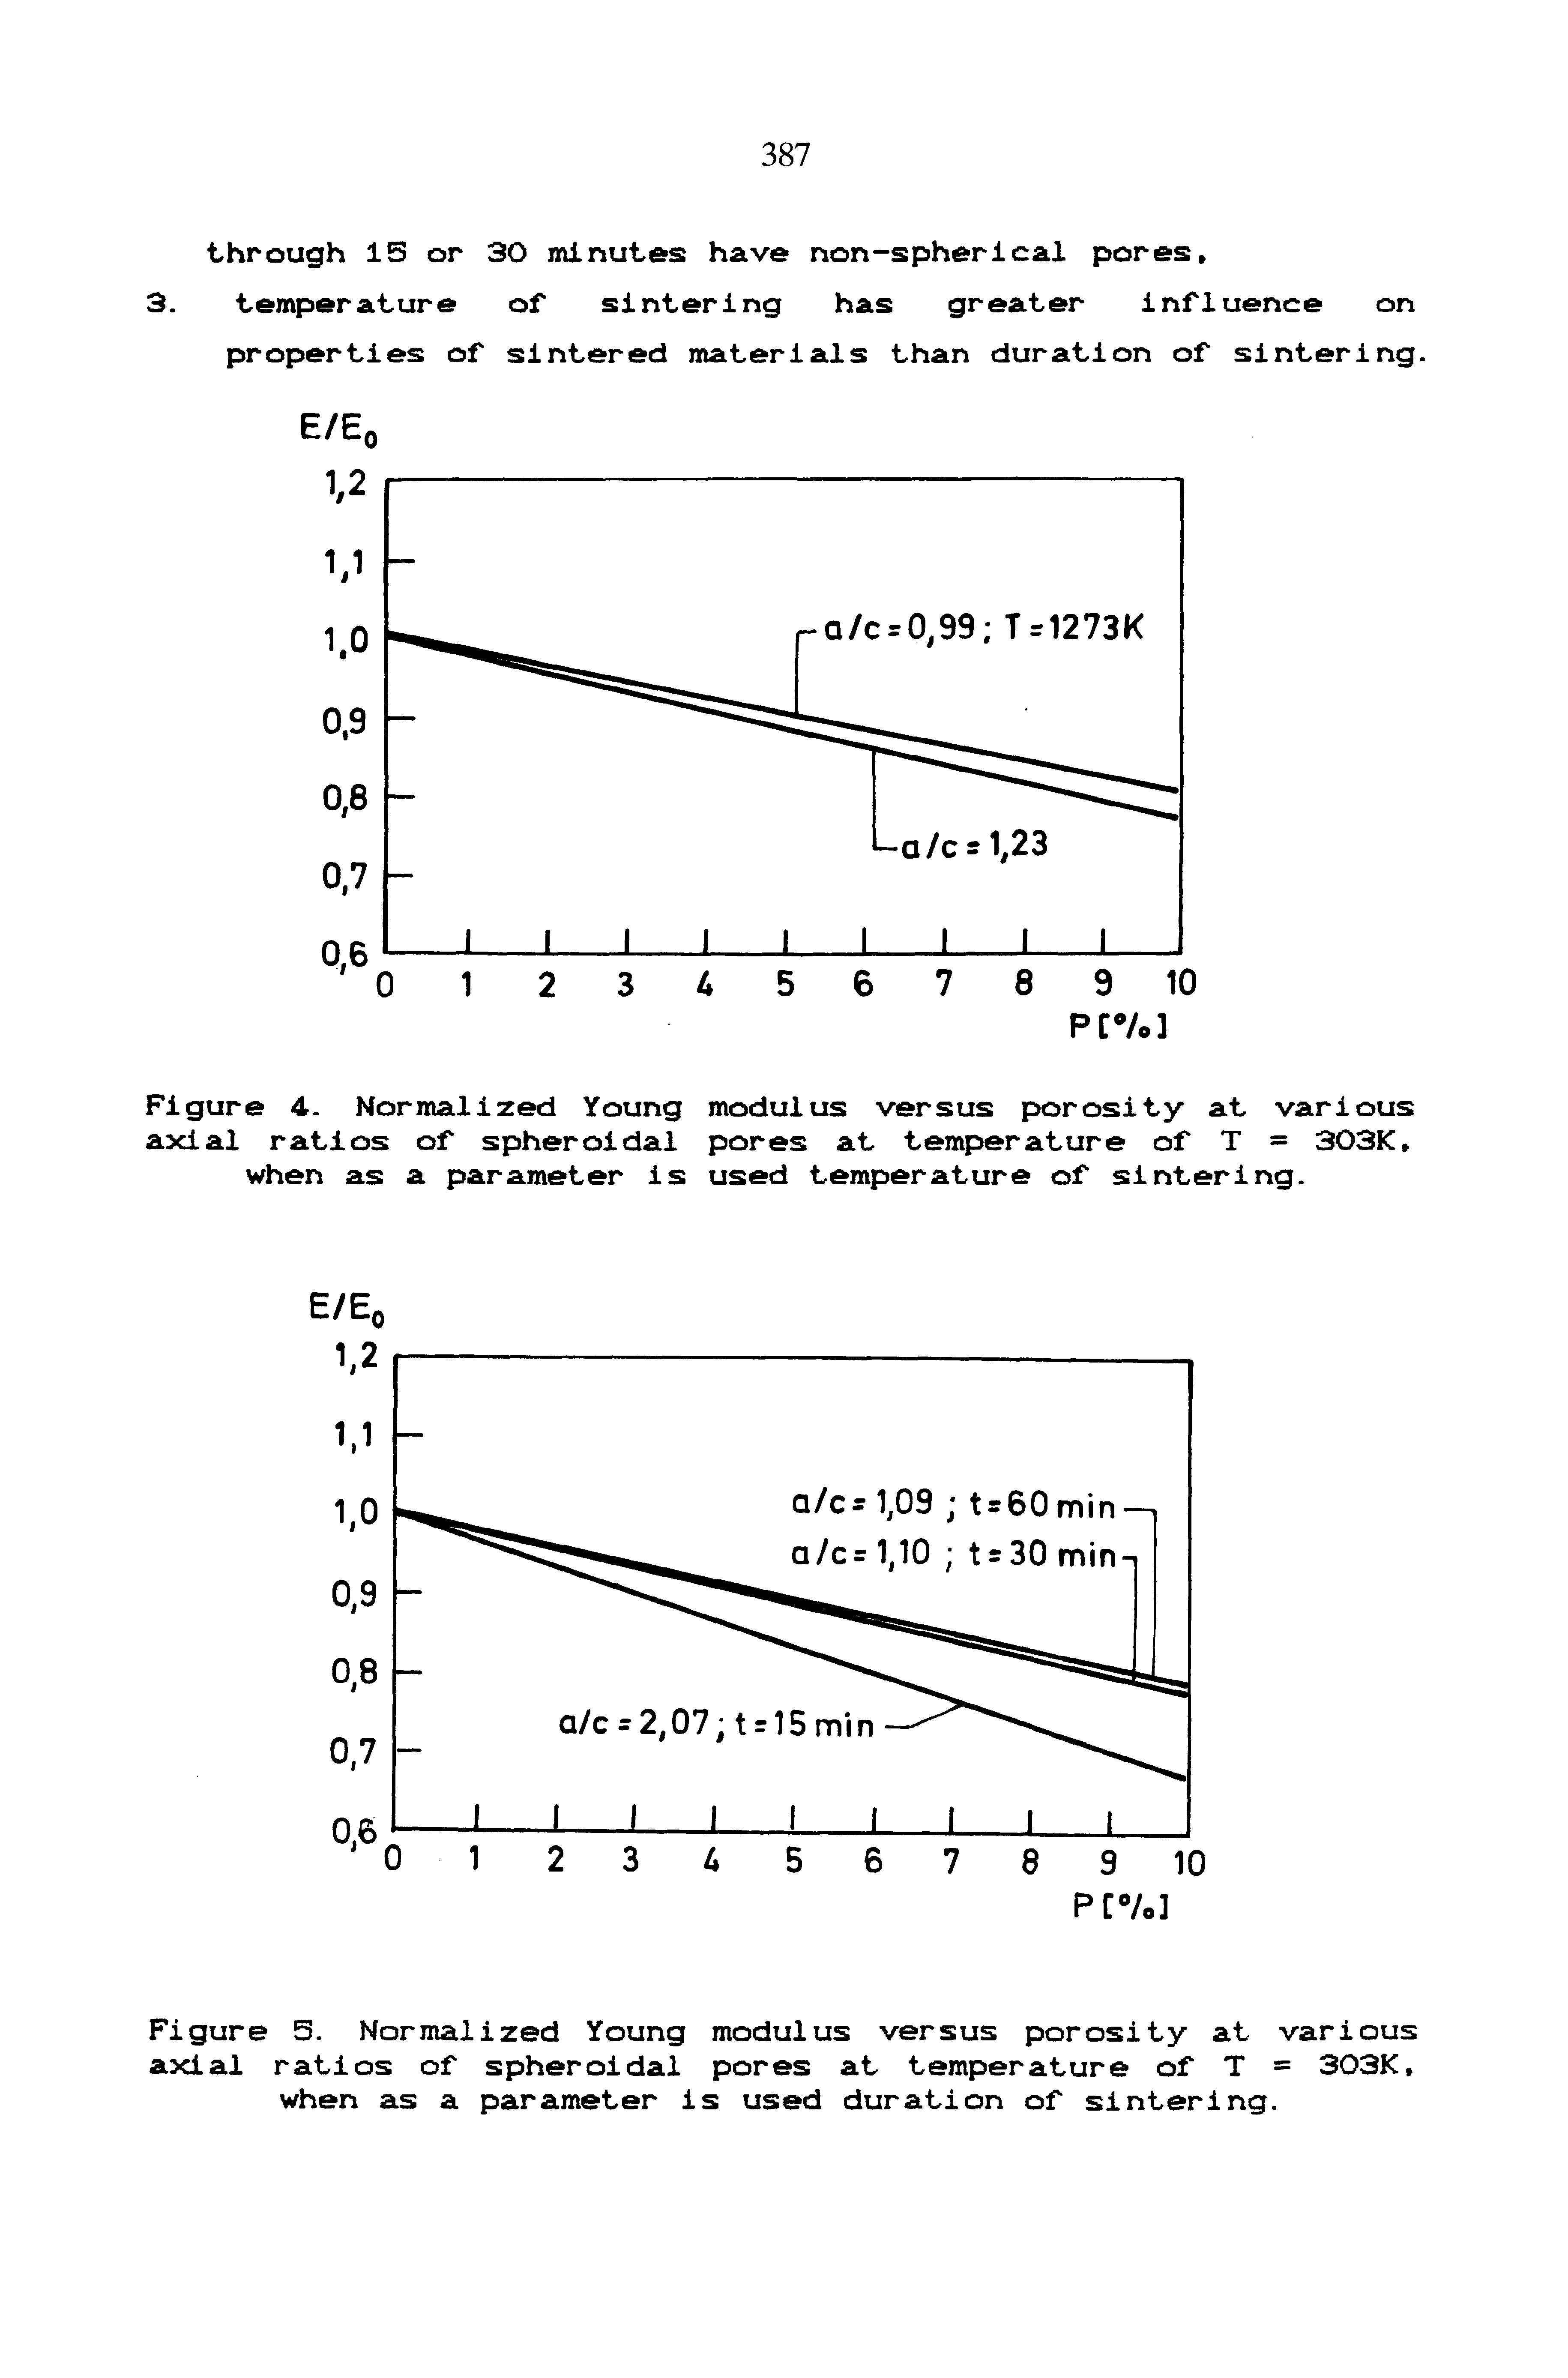 Figure 4. Normalized Young modulus versus porosity at various axial ratios of spheroidal pores at temperature of T = 303K, when as a parameter is used temperature of sintering.